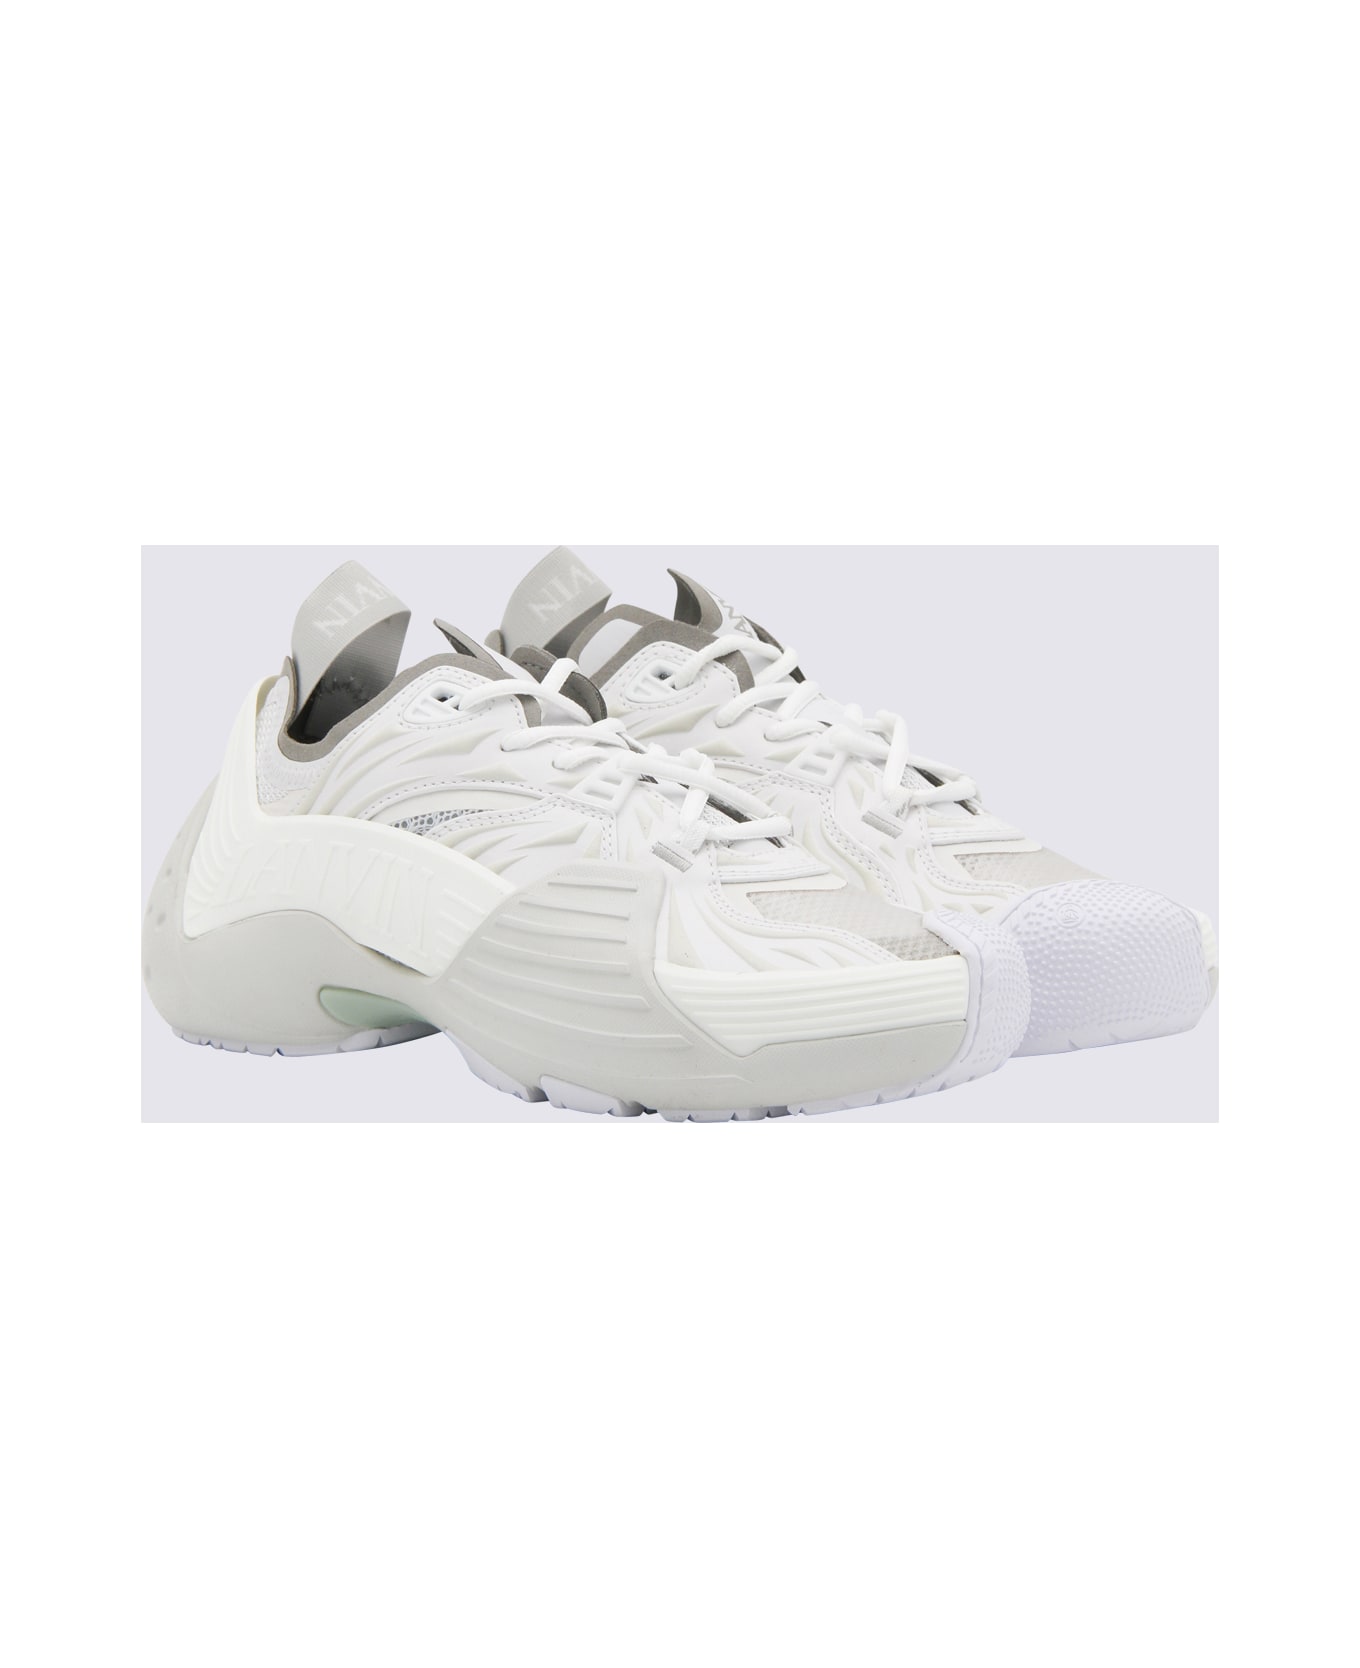 Lanvin White Leather Flash X Sneakers - White スニーカー